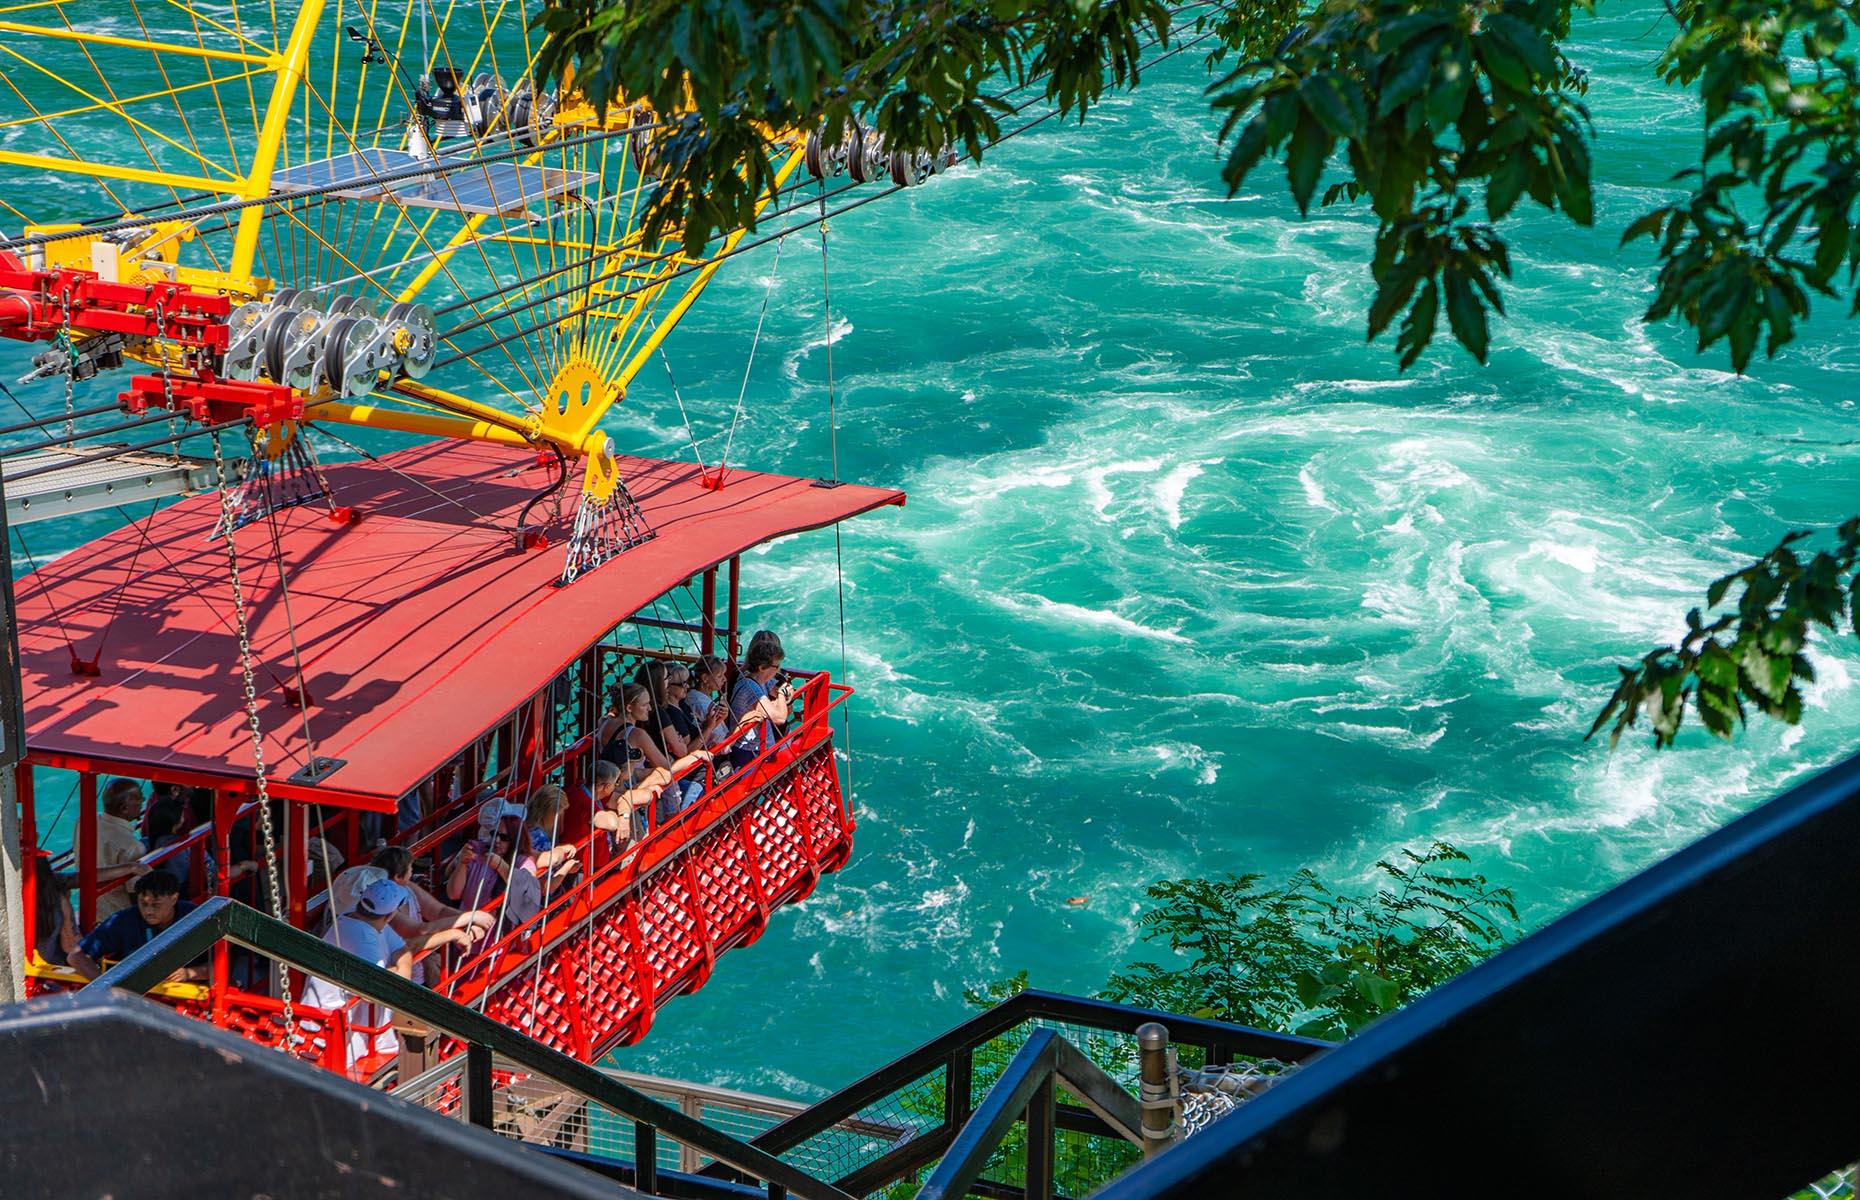 <p>If you don’t like heights from an open-air vehicle, look away now. The historic <a href="https://www.niagaraparks.com/visit/attractions/whirlpool-aero-car">Whirlpool Aero Car</a> takes you across the Niagara Gorge at a dizzying 3,500 feet in the air.</p>  <p>The brainchild of renowned Spanish engineer Leonardo Torres Quevedo, the aero car has been in operation since 1916. Although it’s been restored several times since, it still maintains its unique original design.</p>